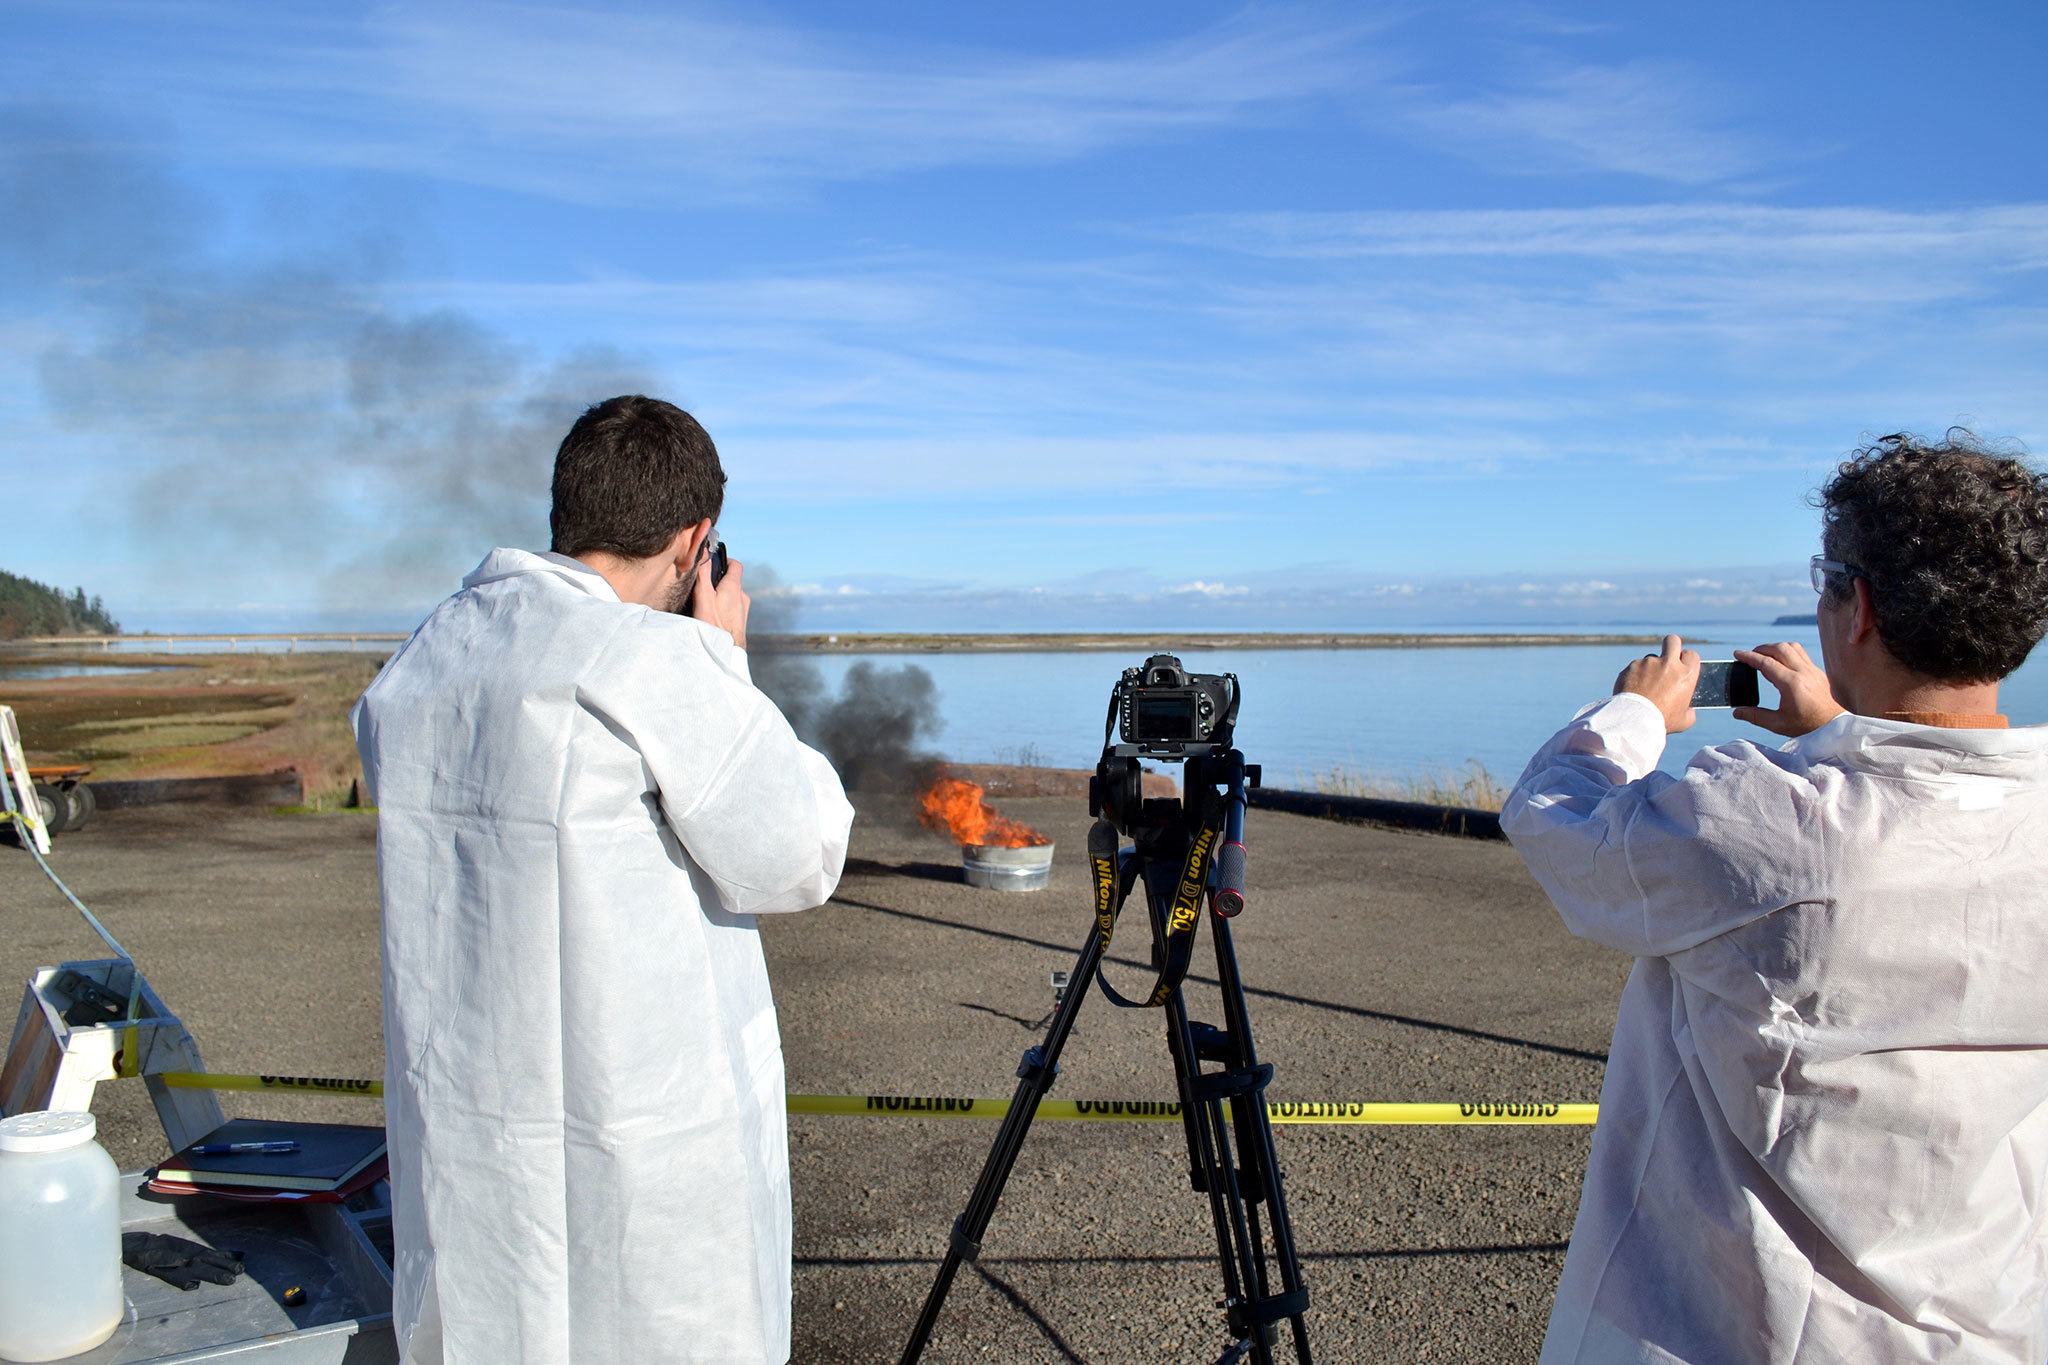 Staff with the Pacific Northwest National Laboratory watch an oil slick burn during a demonstration of how an aggregator wood product helps burn oil more efficiently in cold conditions. (Matthew Nash/Olympic Peninsula News Group)